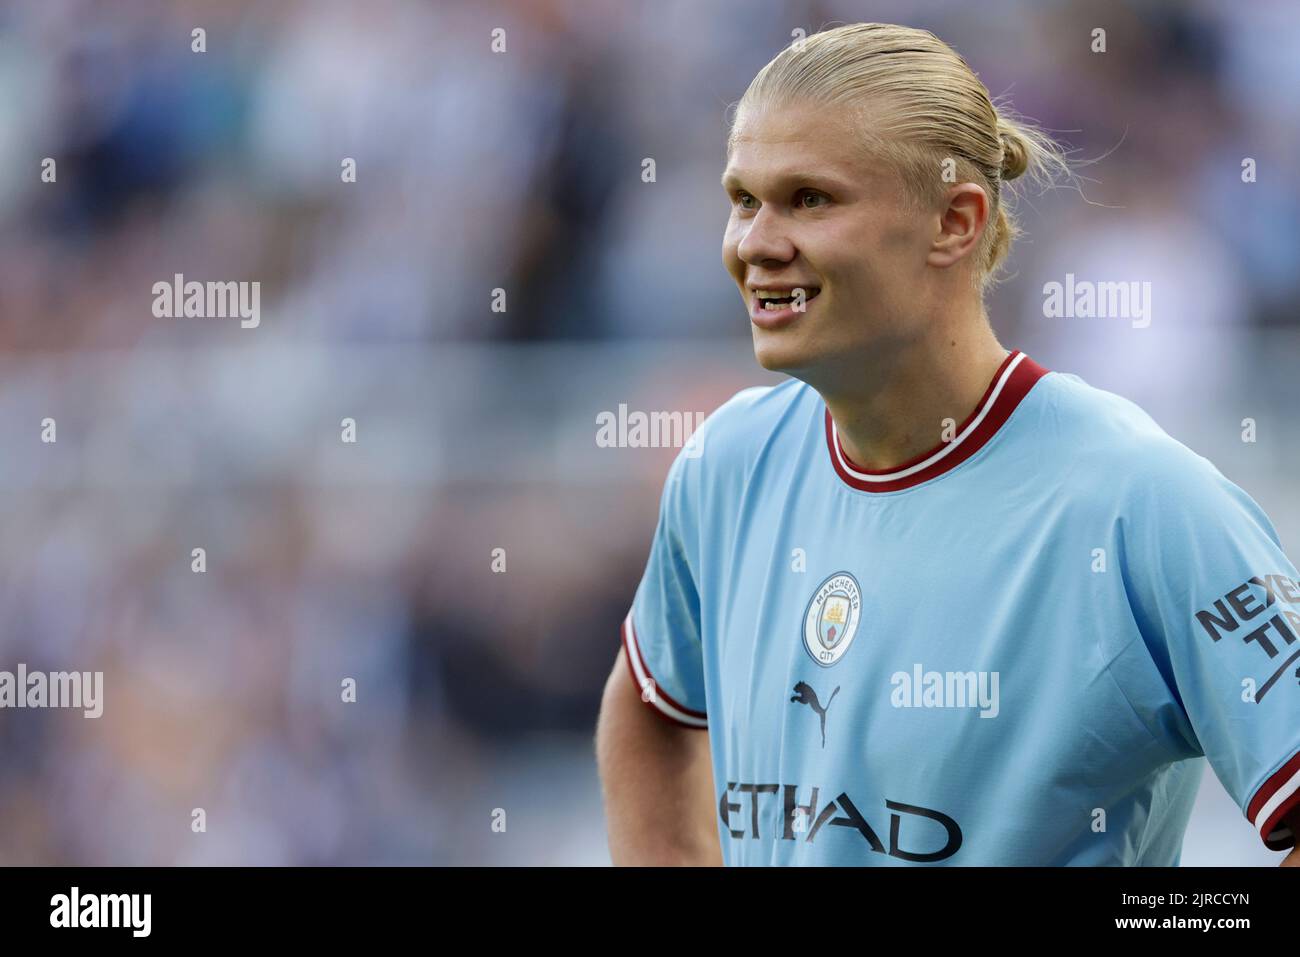 ERLING HAAL&, MANCHESTER CITY FC, 2022 Banque D'Images